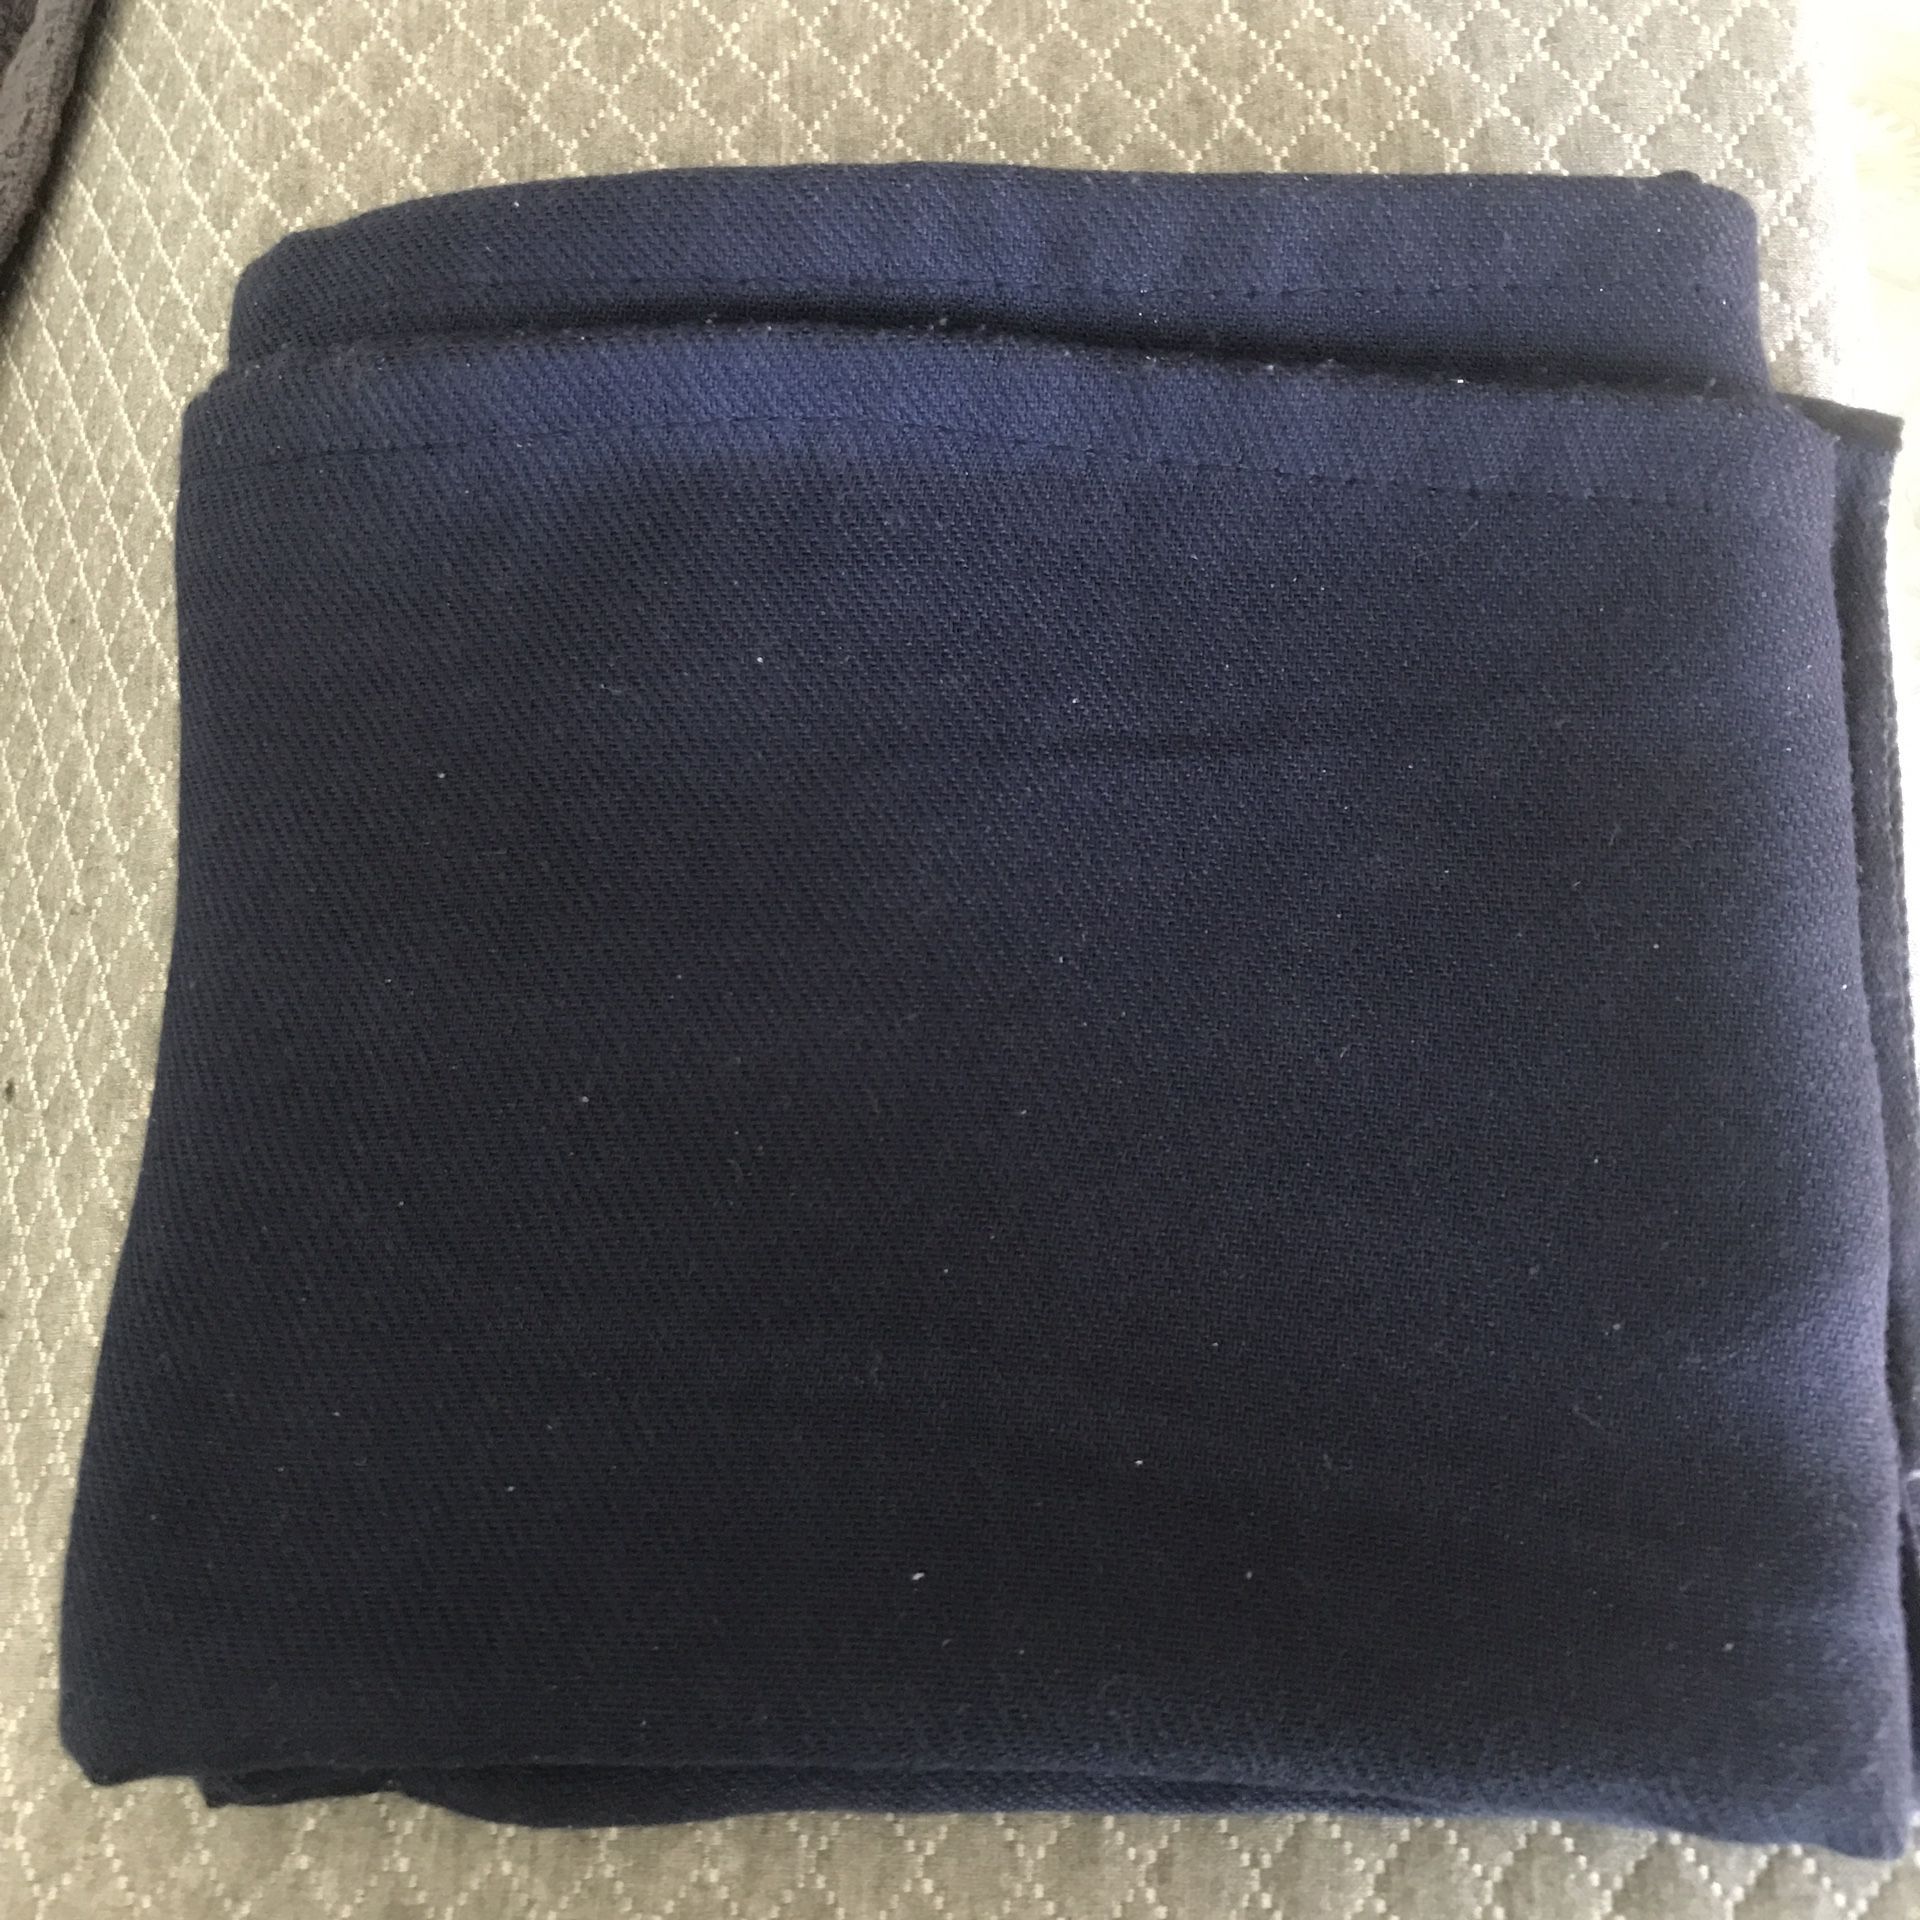 Travel or home navy blue blanket light weight